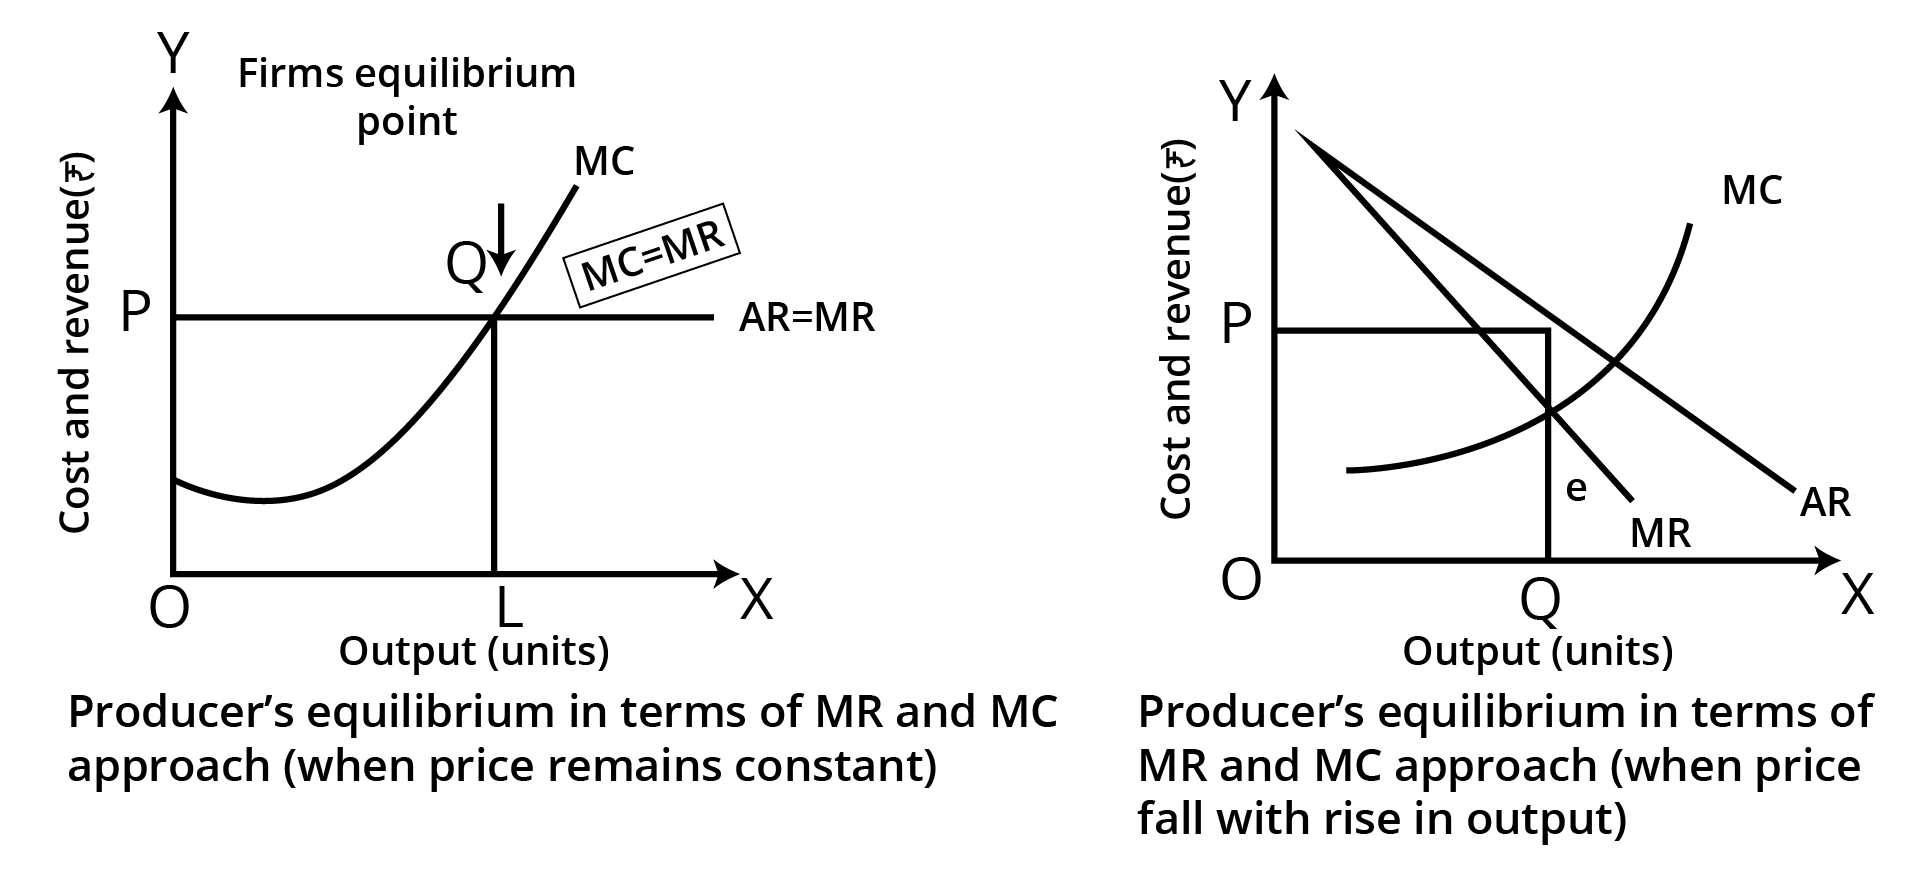 The conditions of a producer’s equilibrium in terms of Marginal Cost and Marginal Revenue